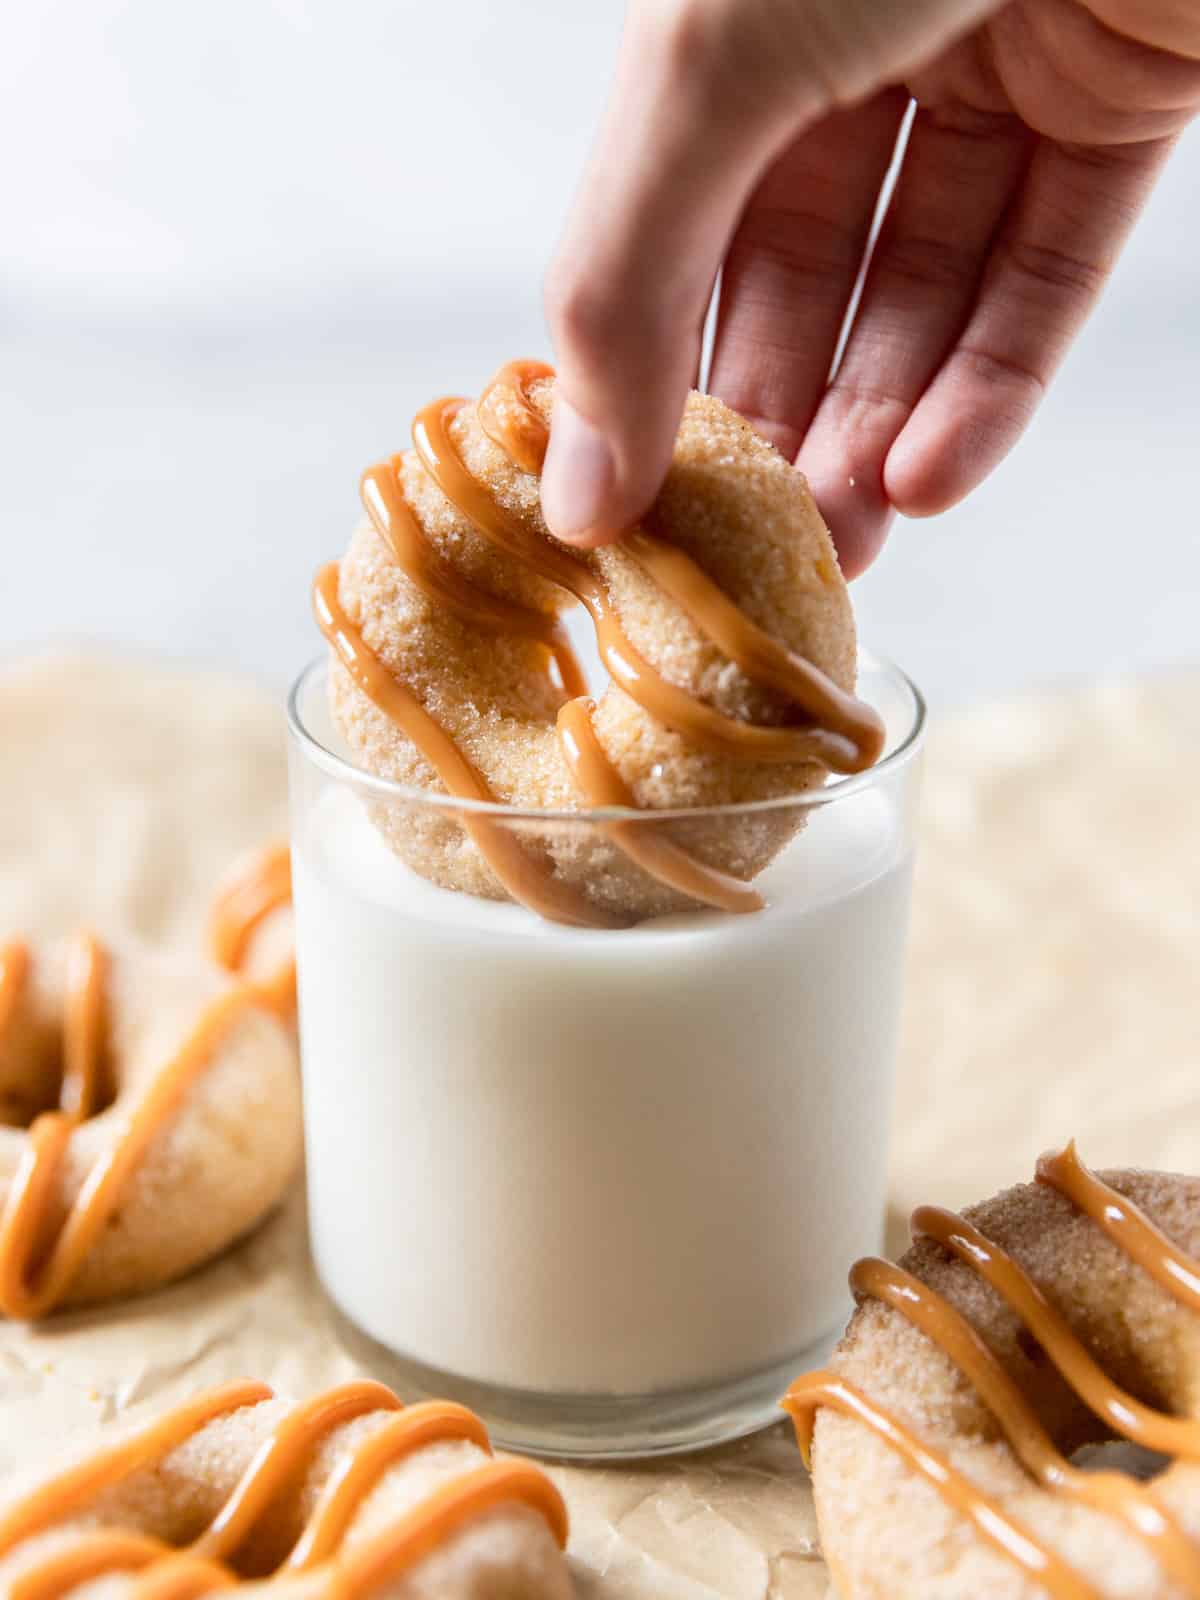 a churro donut being dipped into a glass of milk.